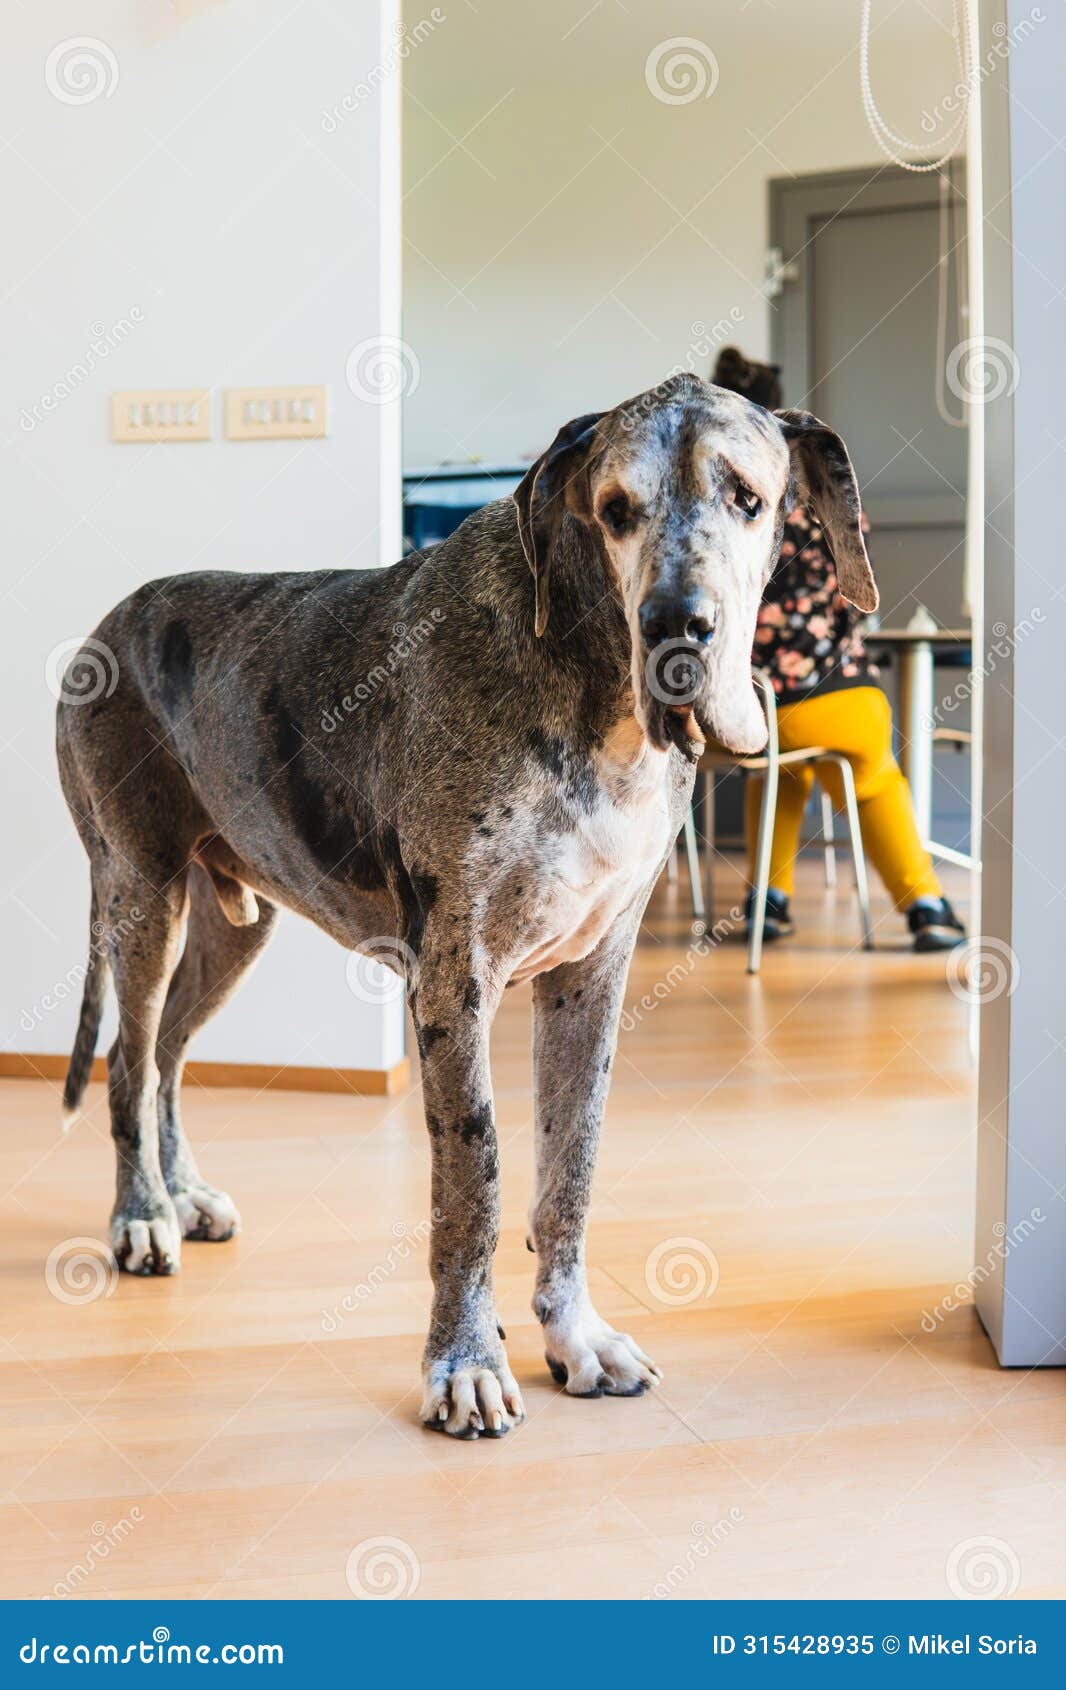 a large giant dog of 80 kilos is standing with a sad face and droopy eyes in front of a table with a person sitting at it